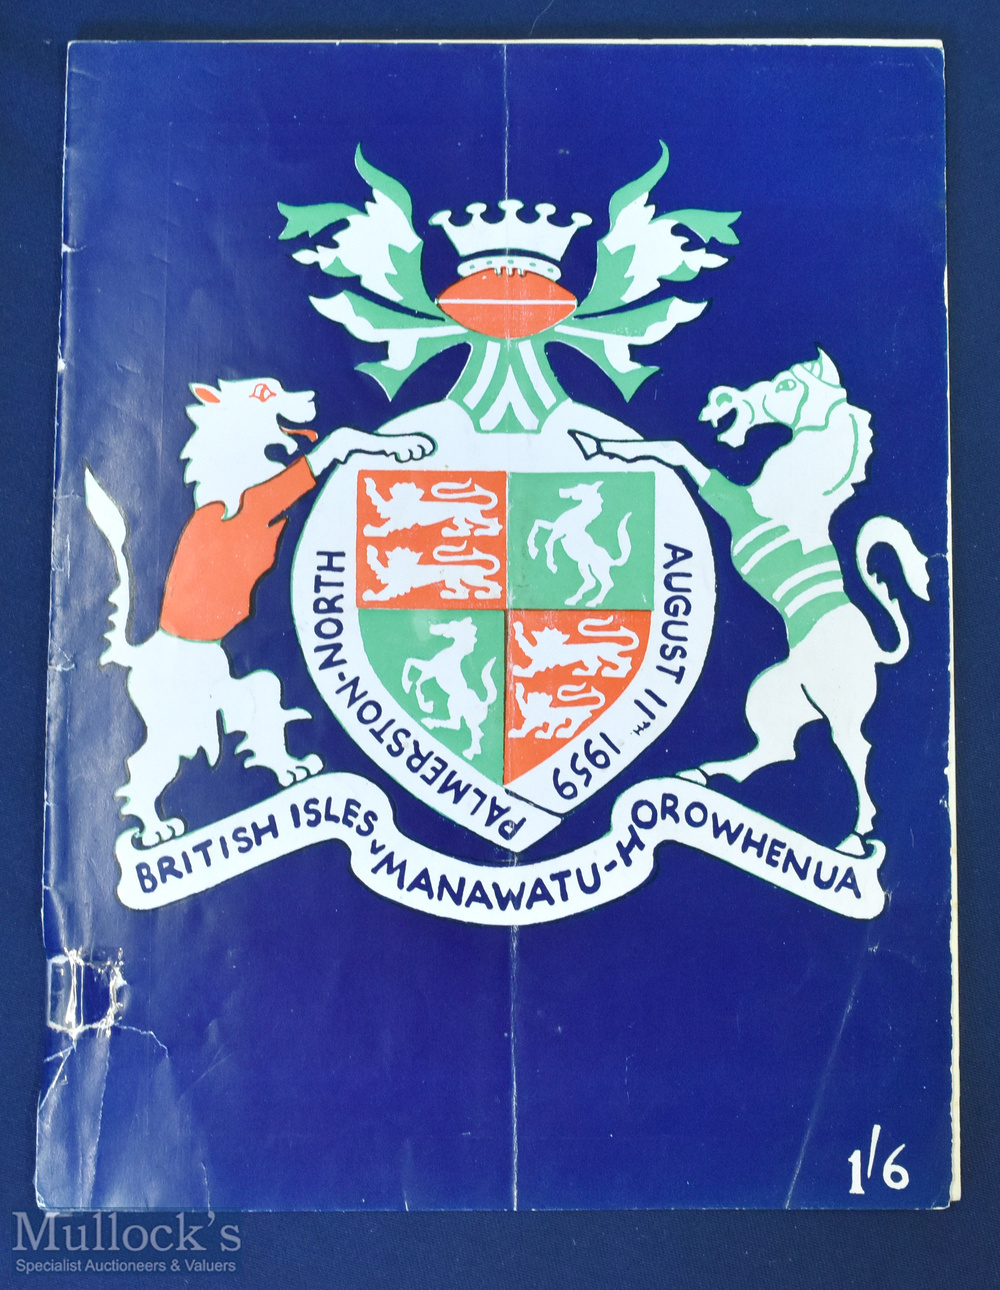 Scarce 1959 British and Irish Lions Rugby Programme: The issue from the Lions' game v Manawatu-